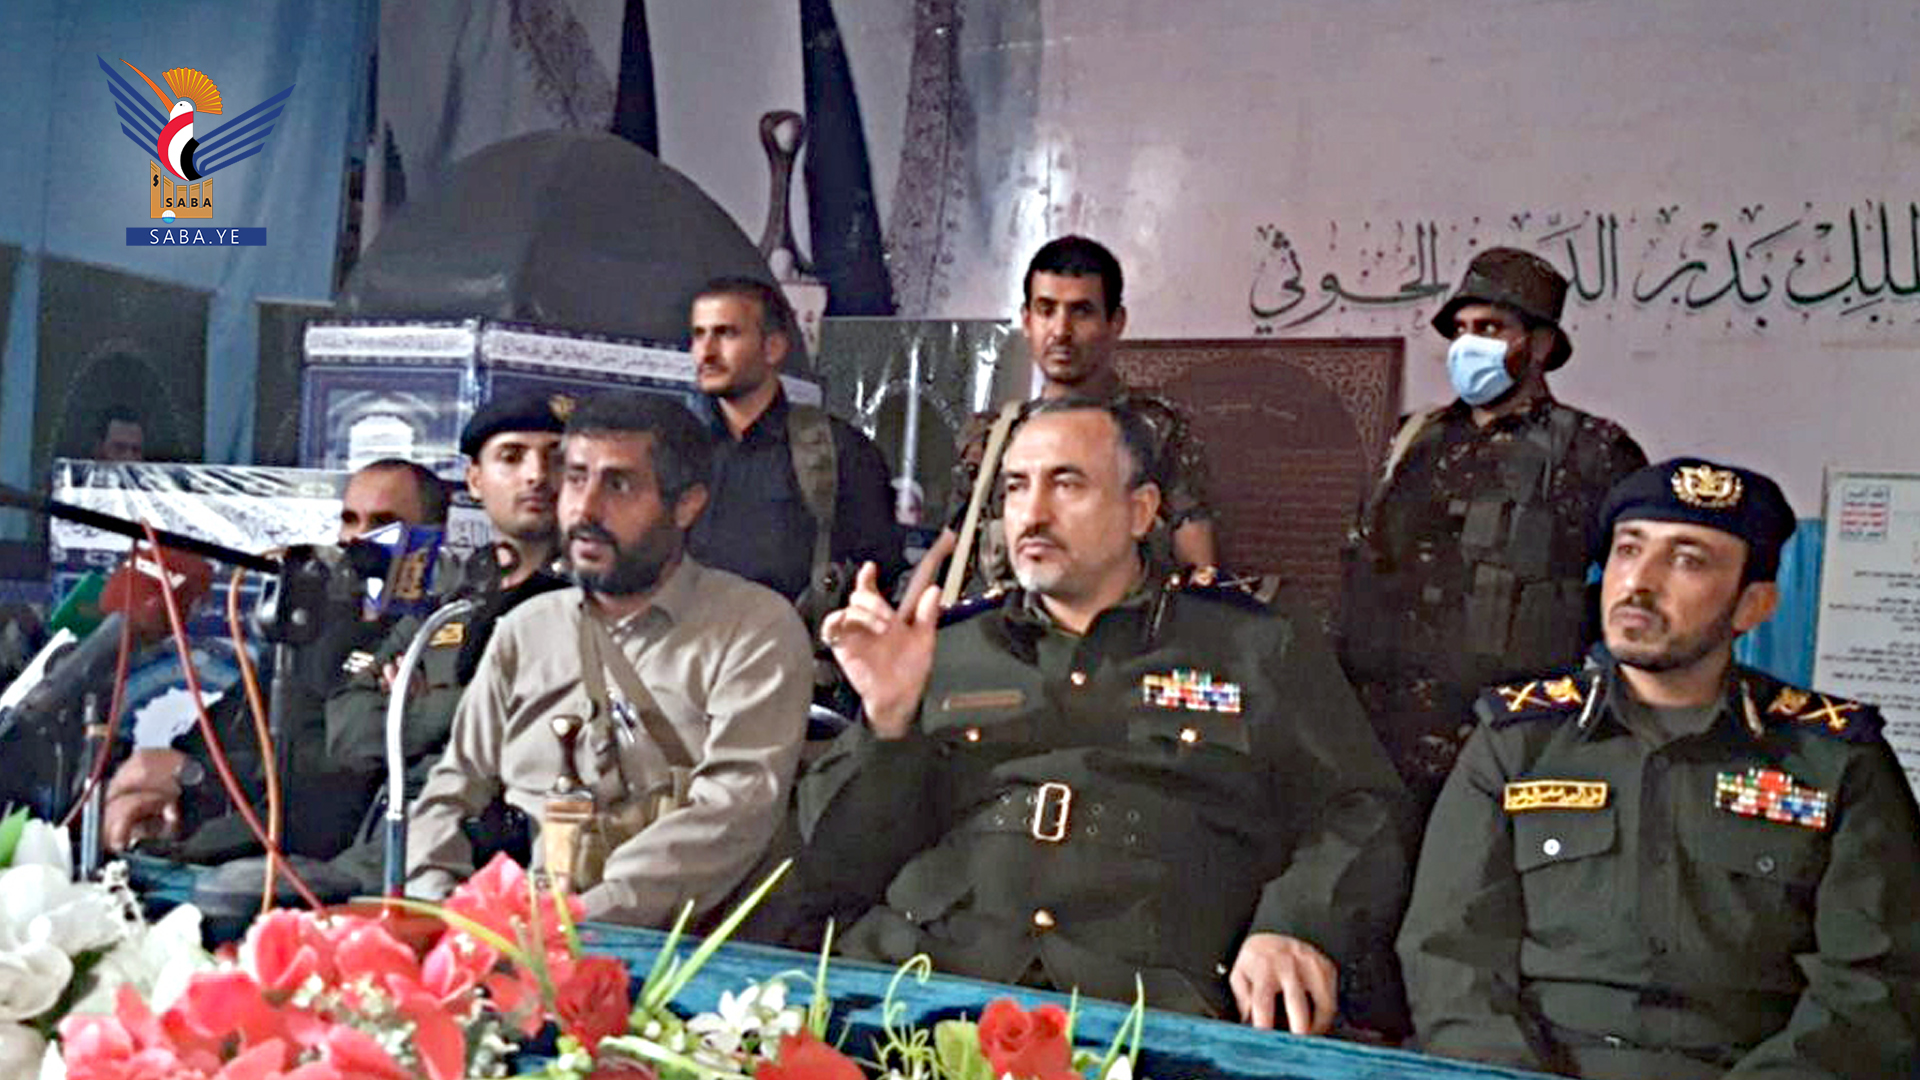 Interior Minister stresses on coordination between security units